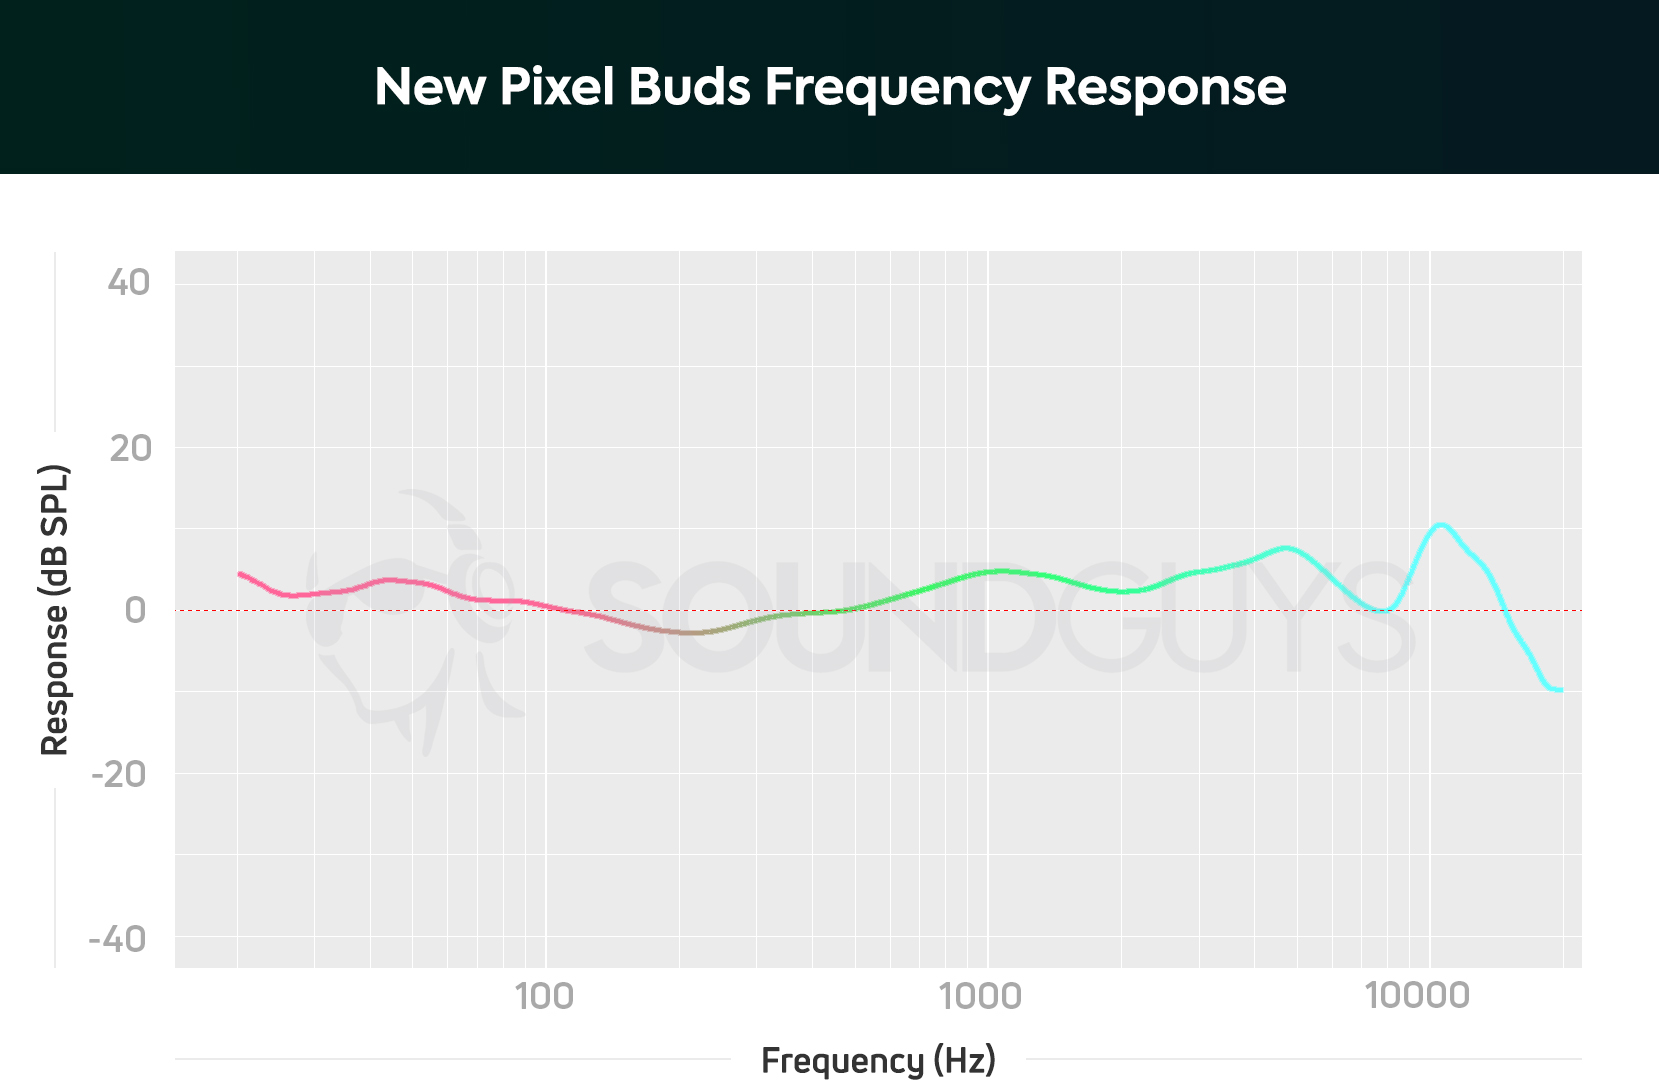 New Pixel Buds Frequency Response